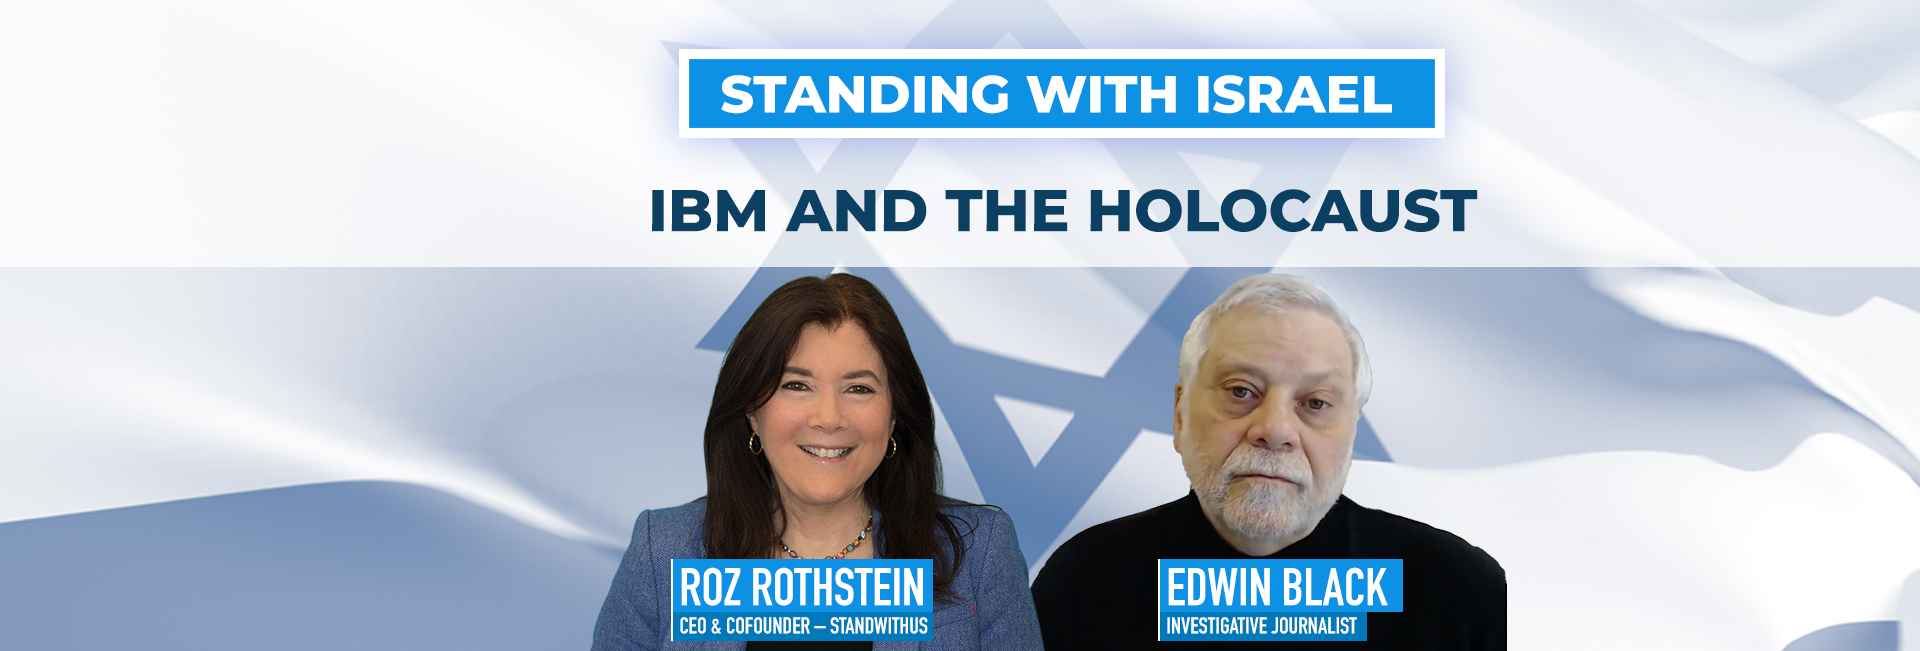 Standing With Israel with Roz Rothstein – Edwin Black: IBM and the Holocaust